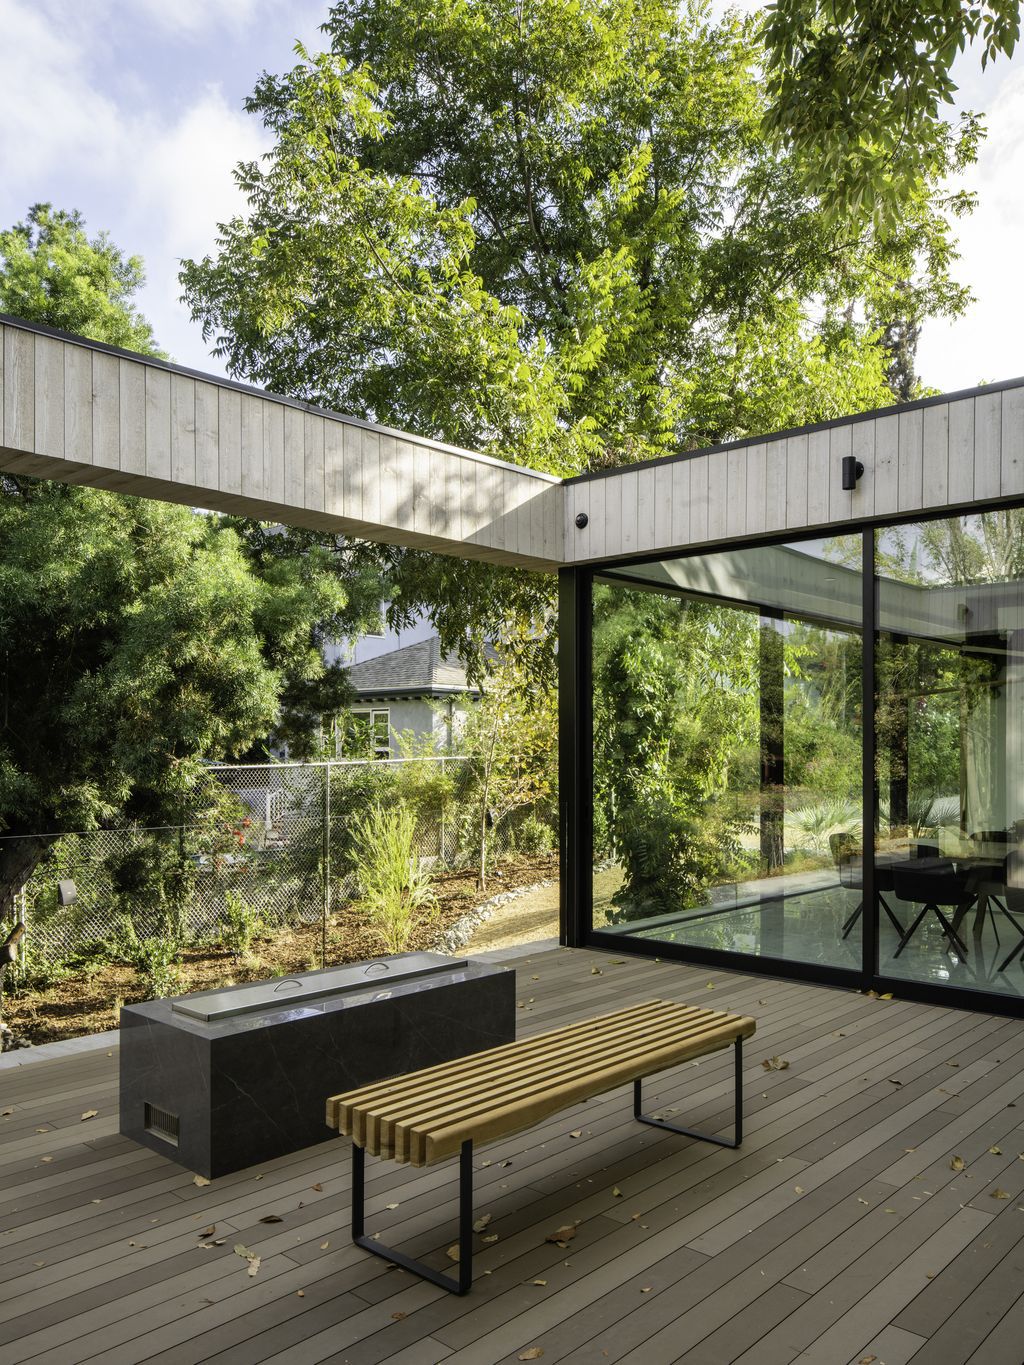 Bridge-House-Nestled-in-Nature-in-Los-Angeles-by-Dan-Brunn-Architecture-17